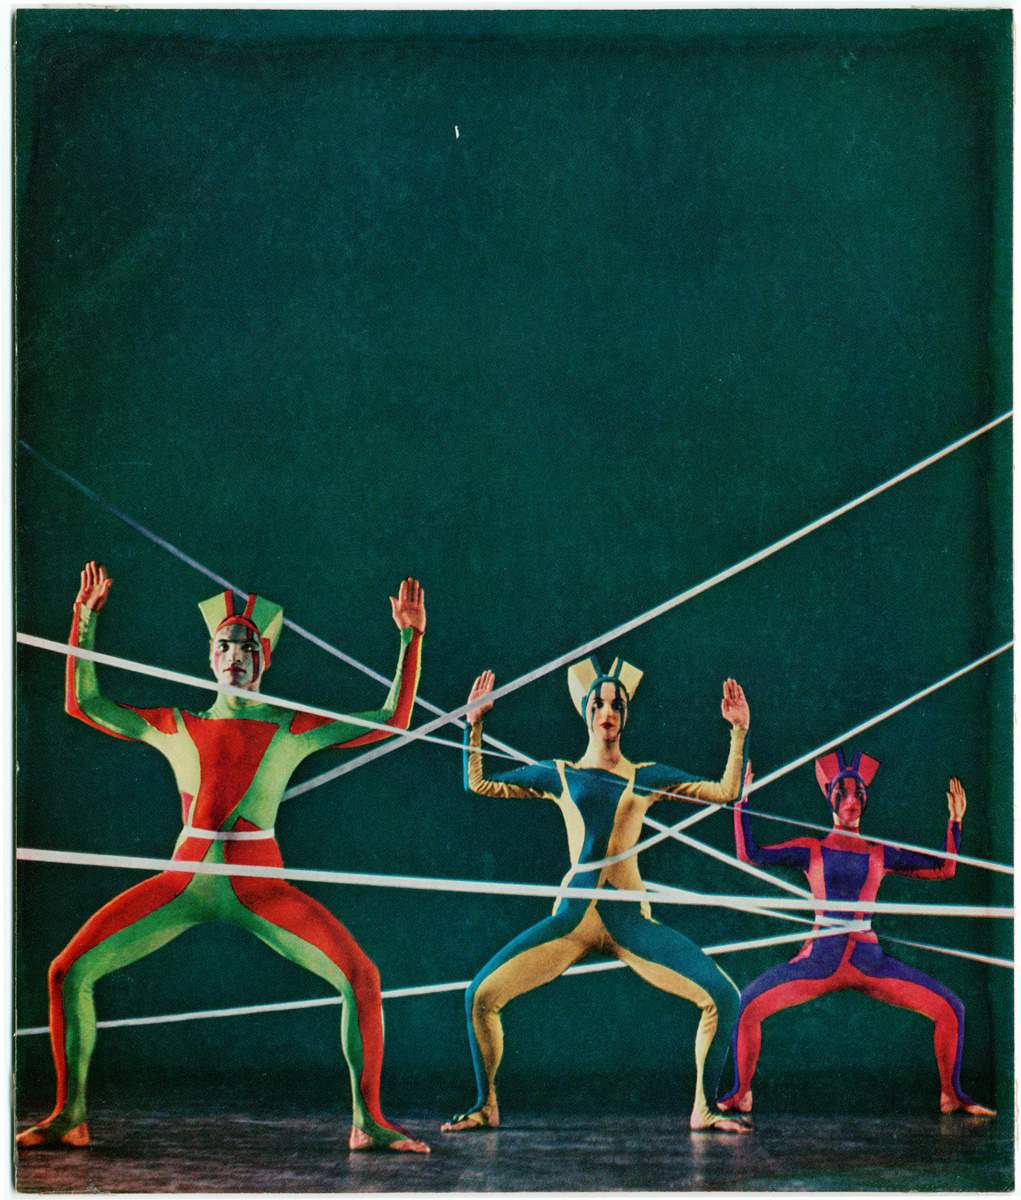 Three dancers in different colored costumes during a performance of "Web", later known as "Tensile Involvement", created by Alwin Nikolais